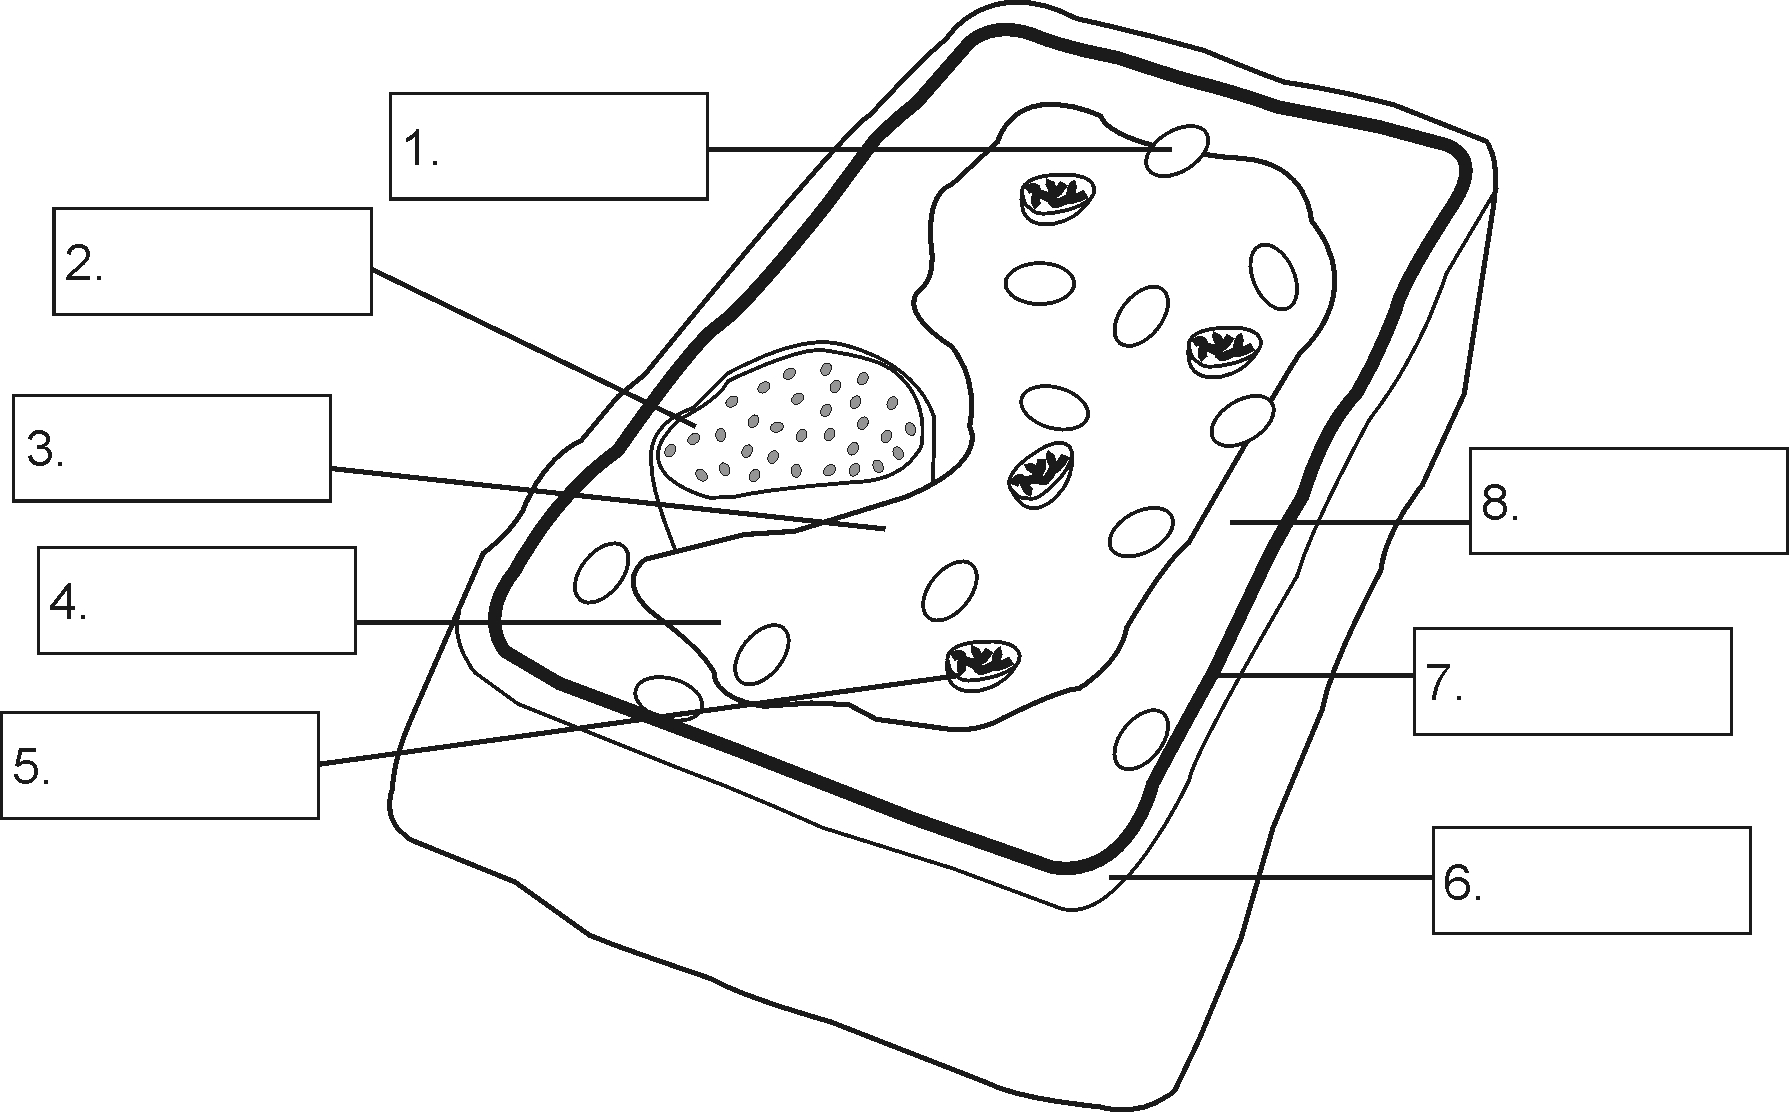 Plant Cell Drawing at GetDrawings | Free download